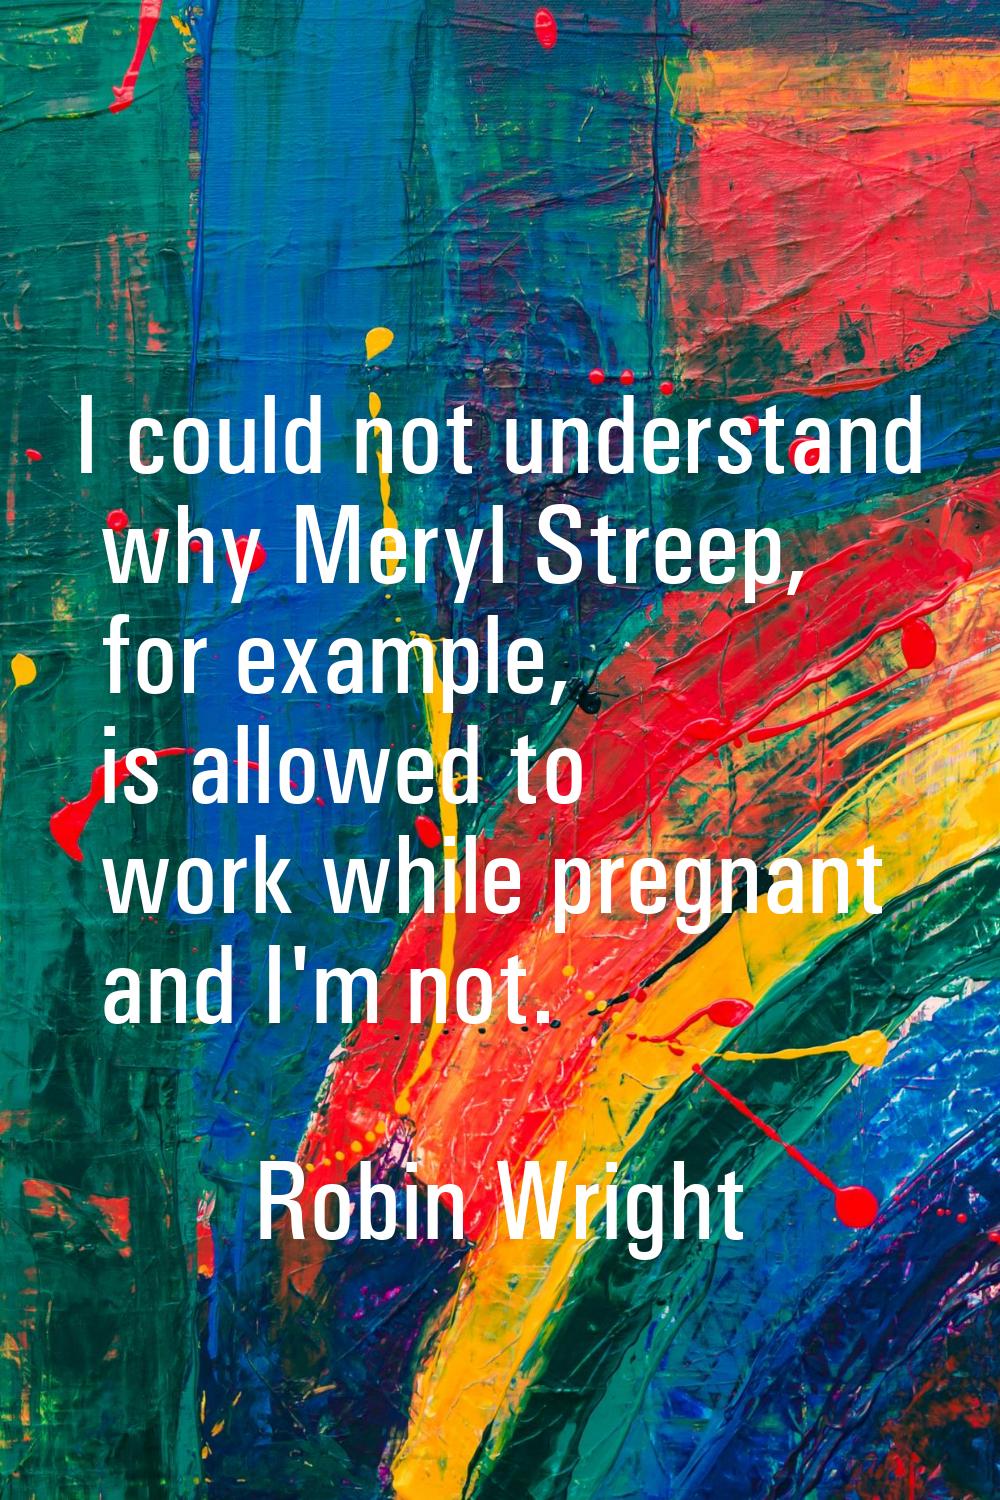 I could not understand why Meryl Streep, for example, is allowed to work while pregnant and I'm not